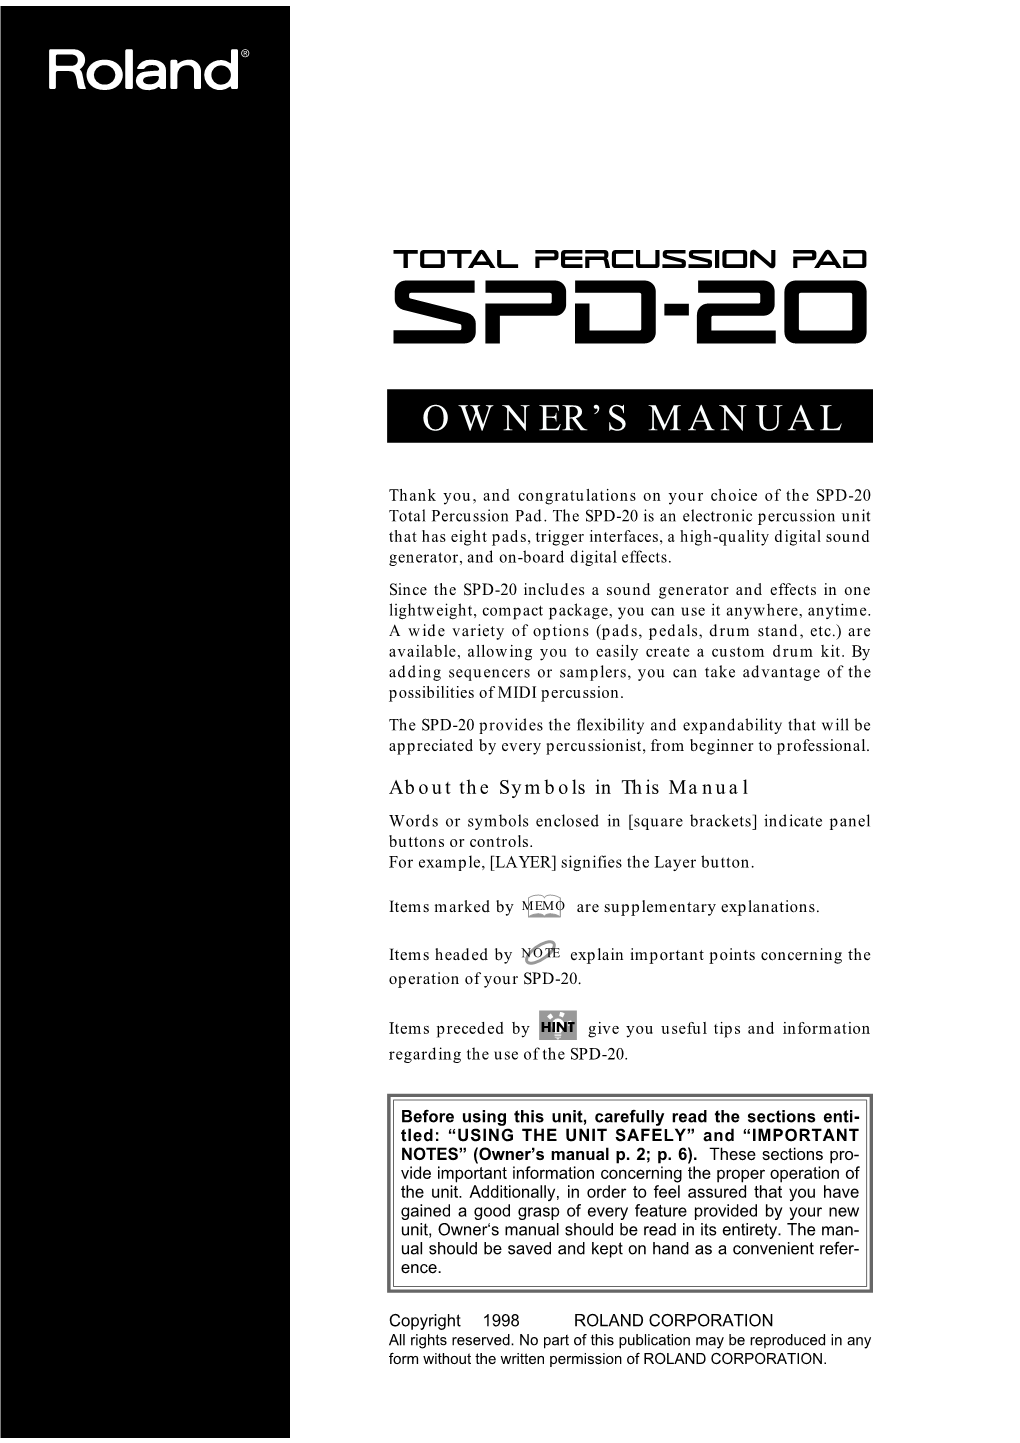 SPD-20 Owners Manual